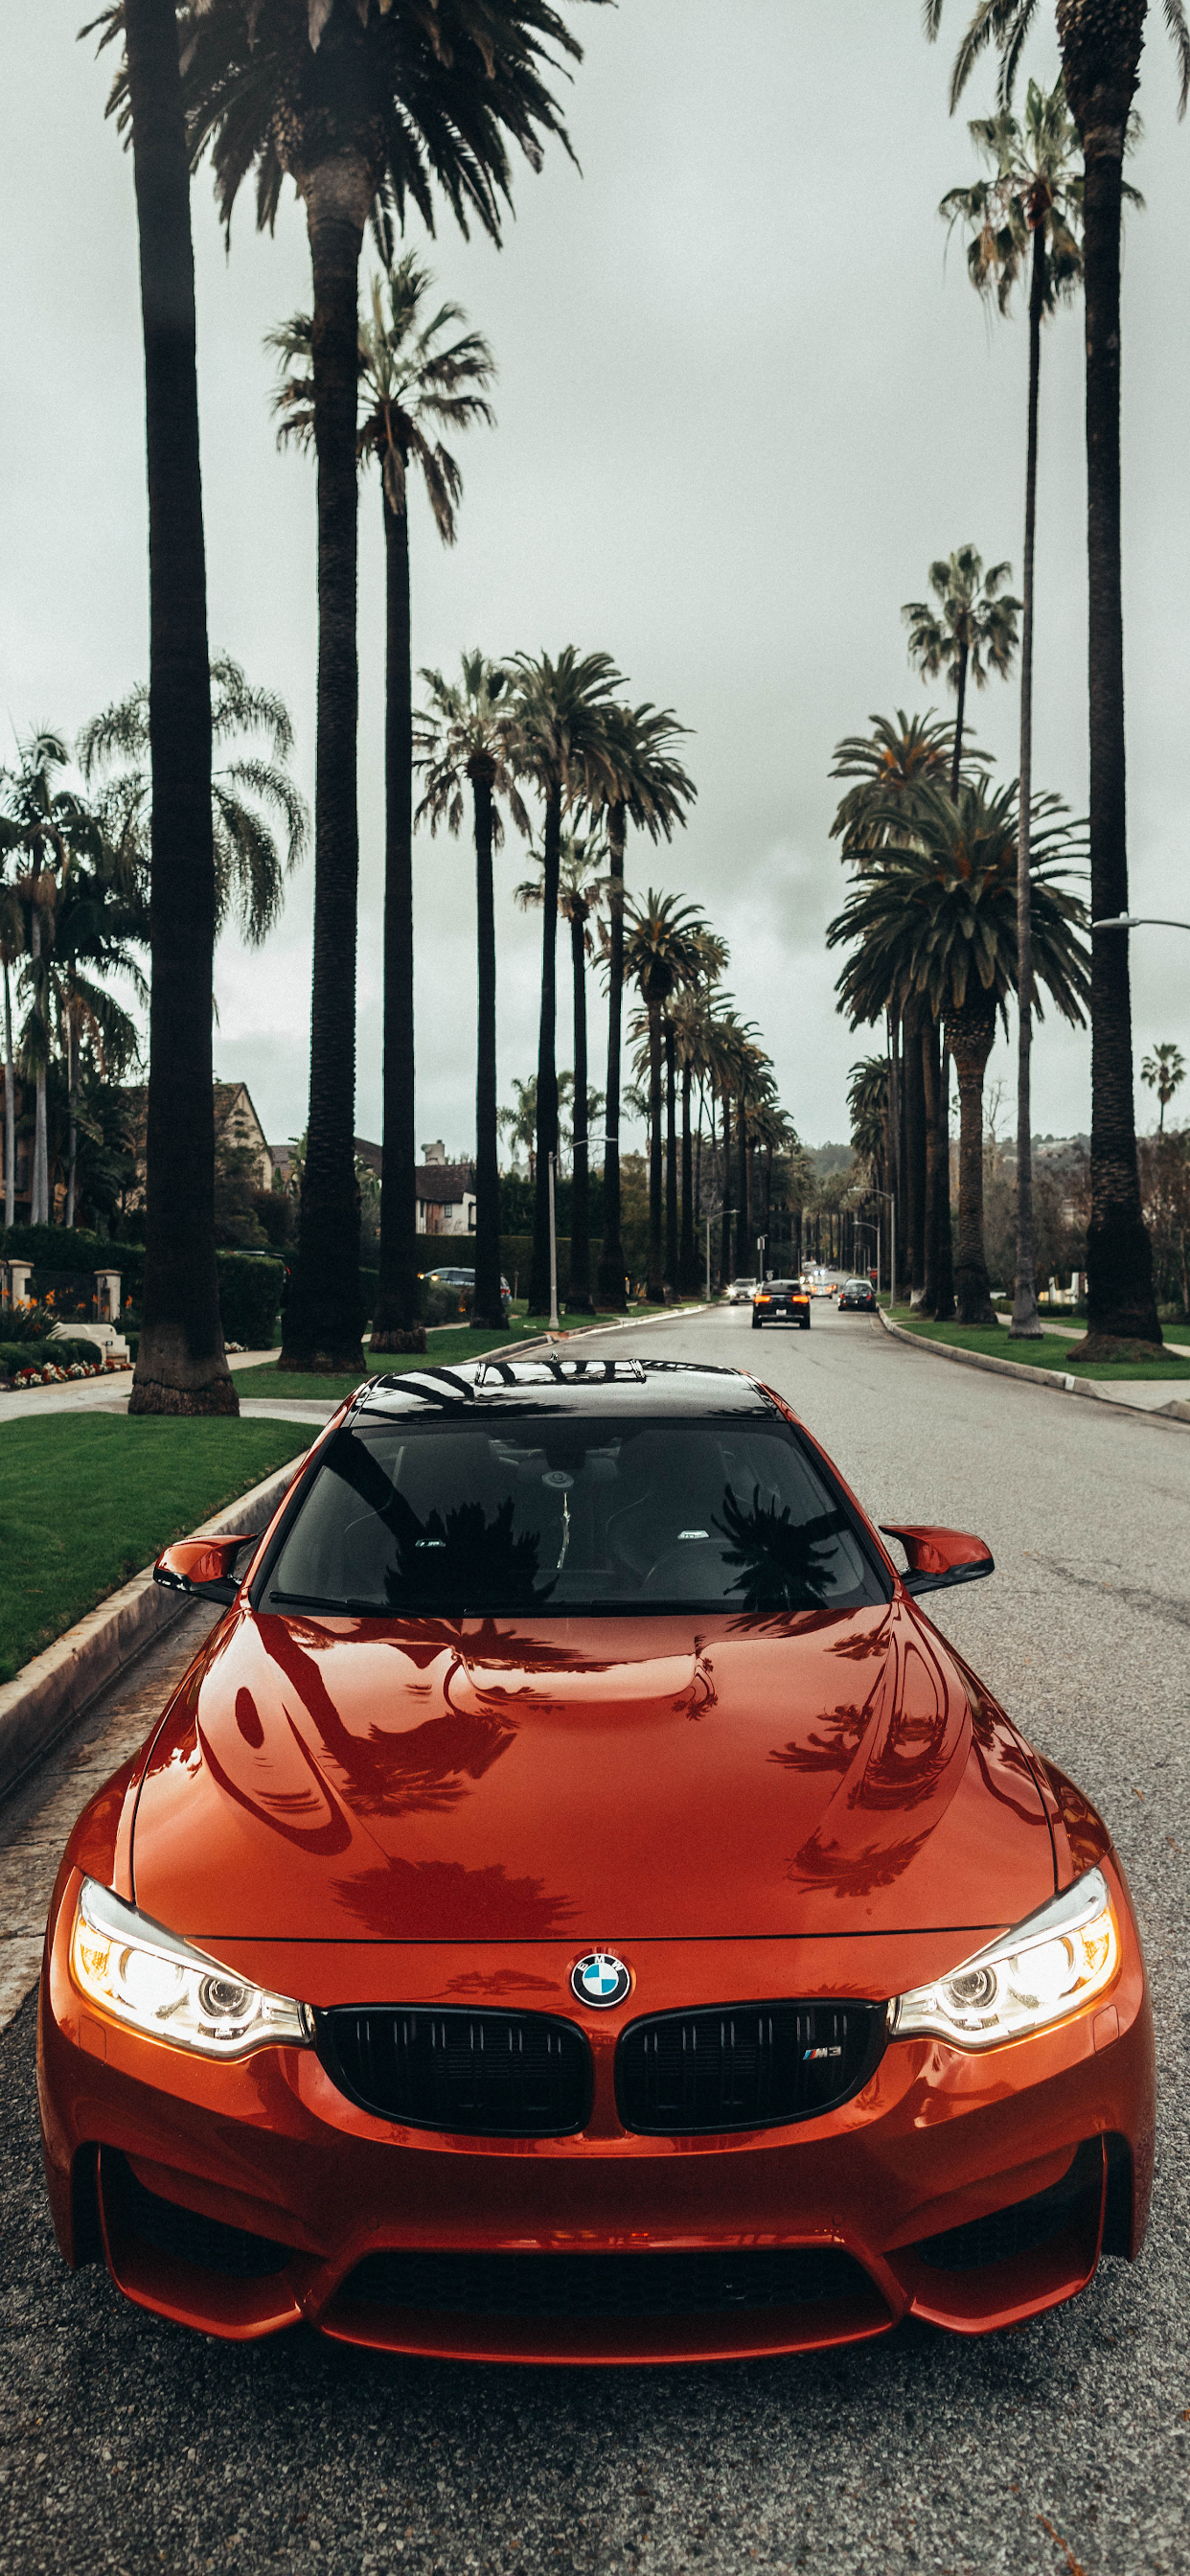 Cars Wallpaper for iPhone Pro Max, X, 6 Download